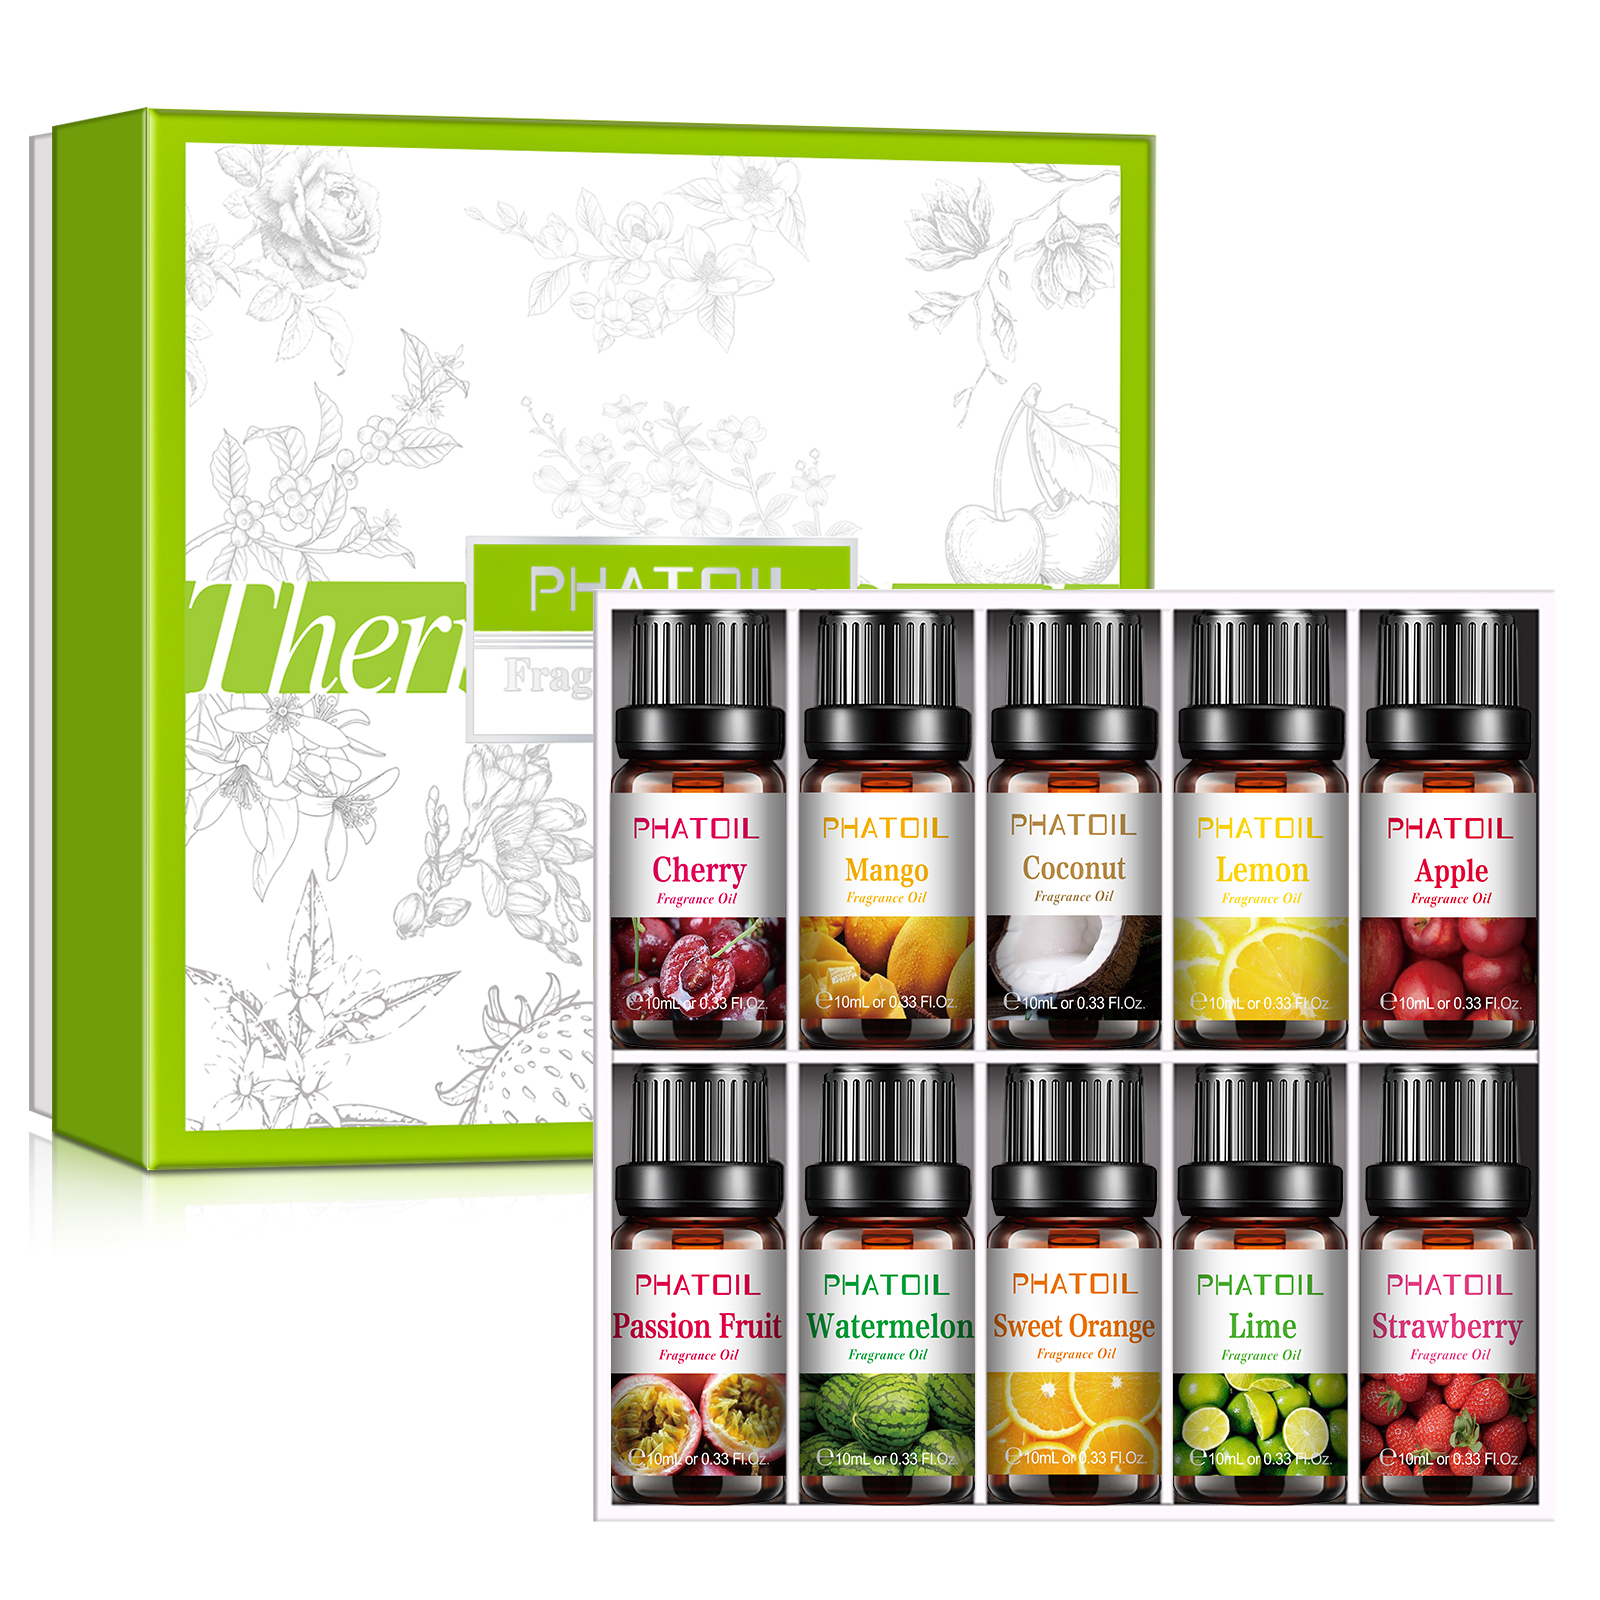 10ml*10pcs Home Fruit Oils kit for candles soaps diffuser